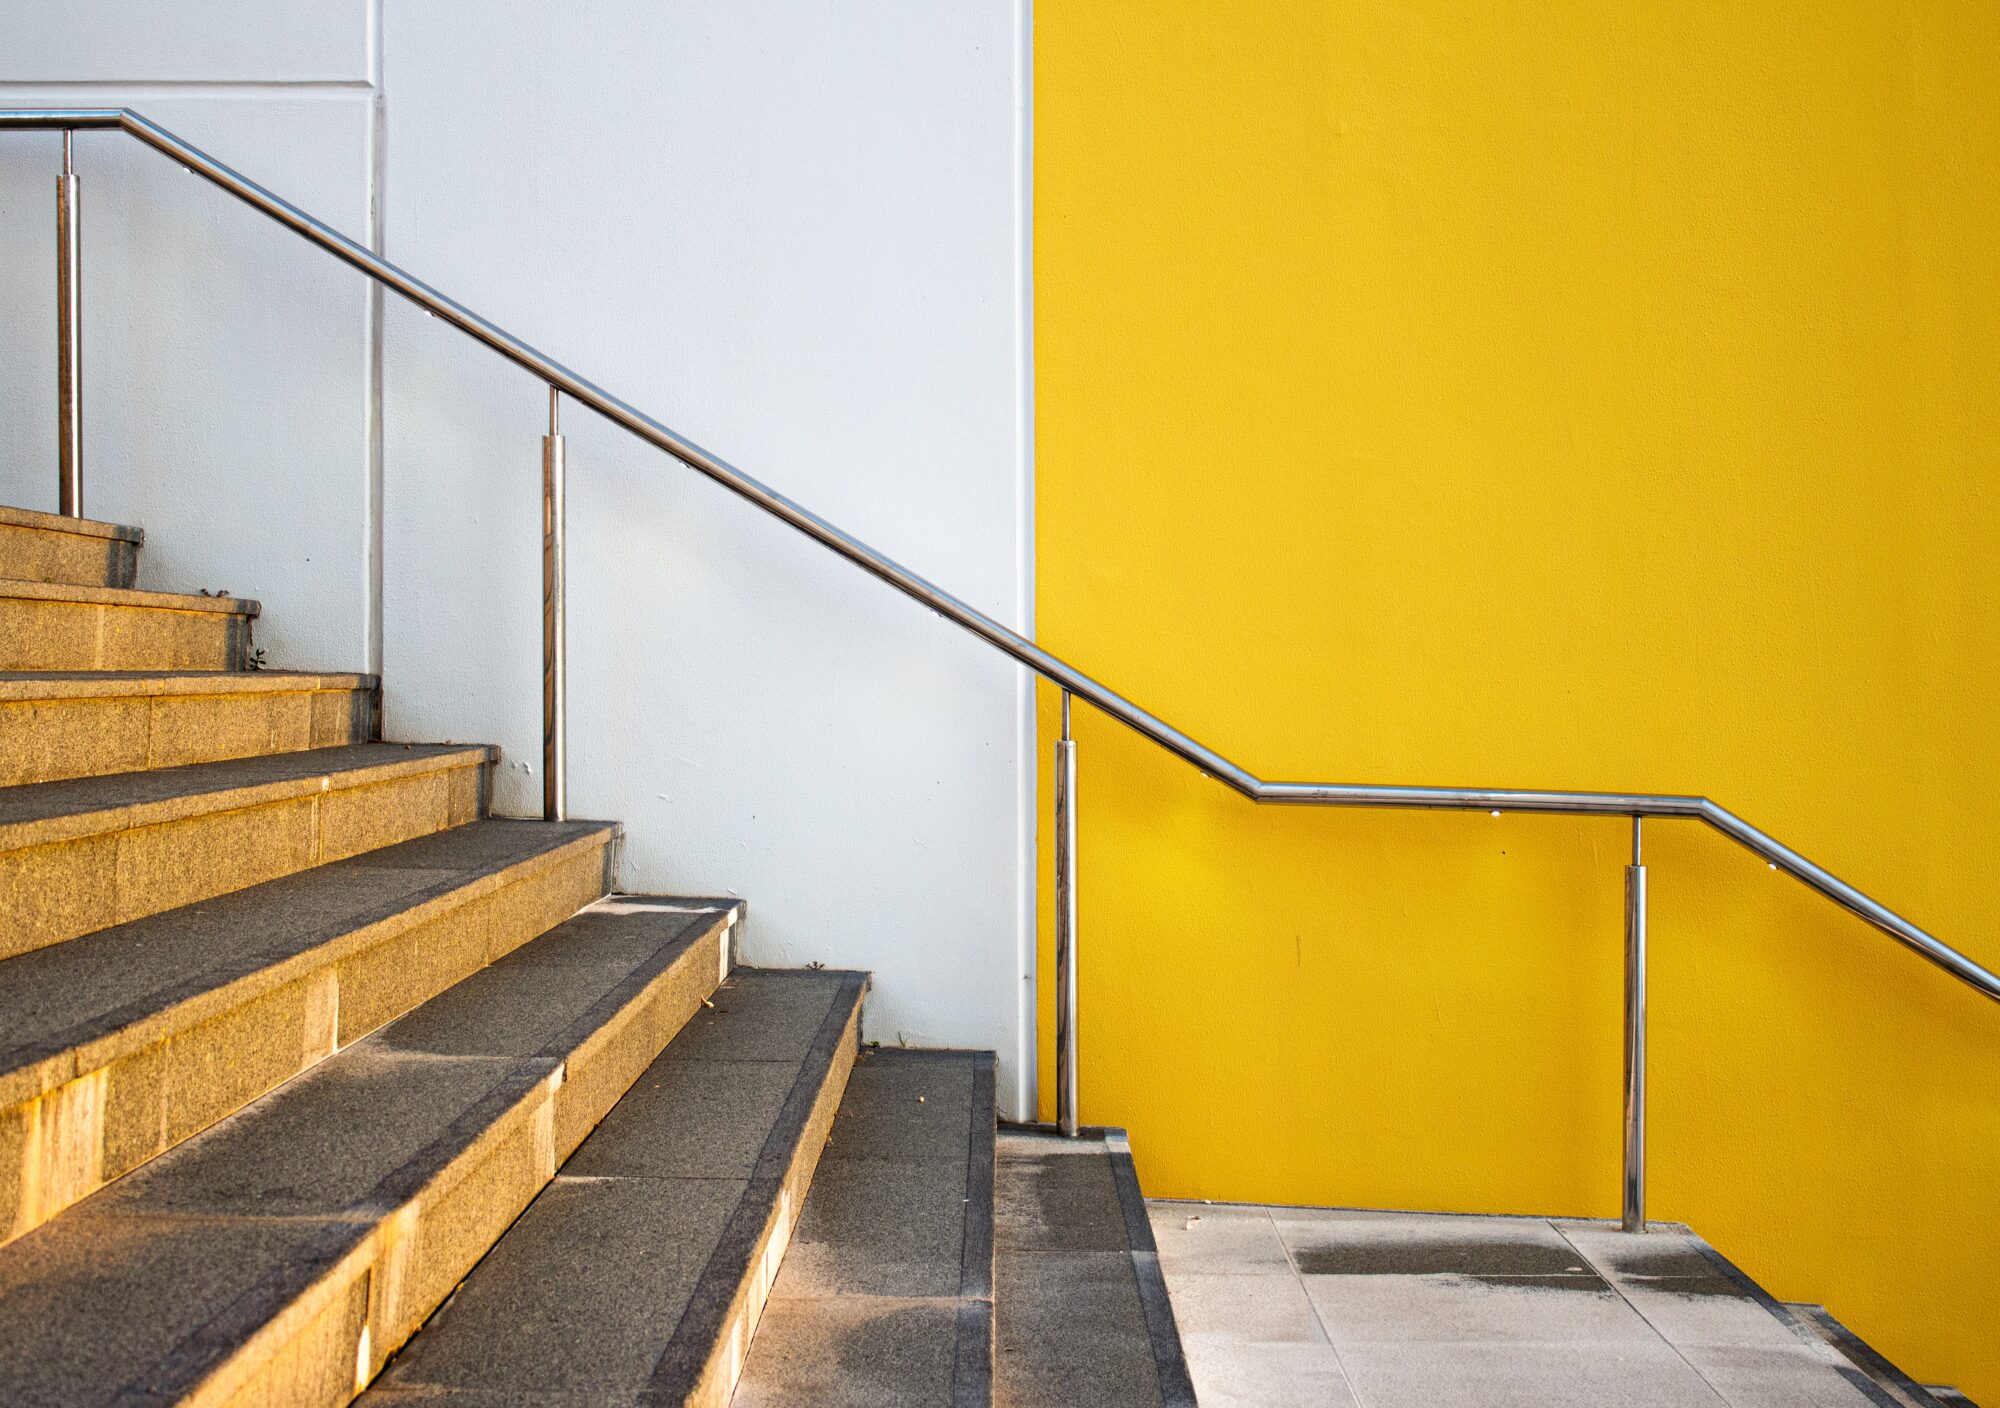 A stairway with textured golden steps and a metal handrail, beside a vibrant yellow wall and prone to stairwell accidents, contrasting with a white tiled floor, creating a bold architectural contrast.